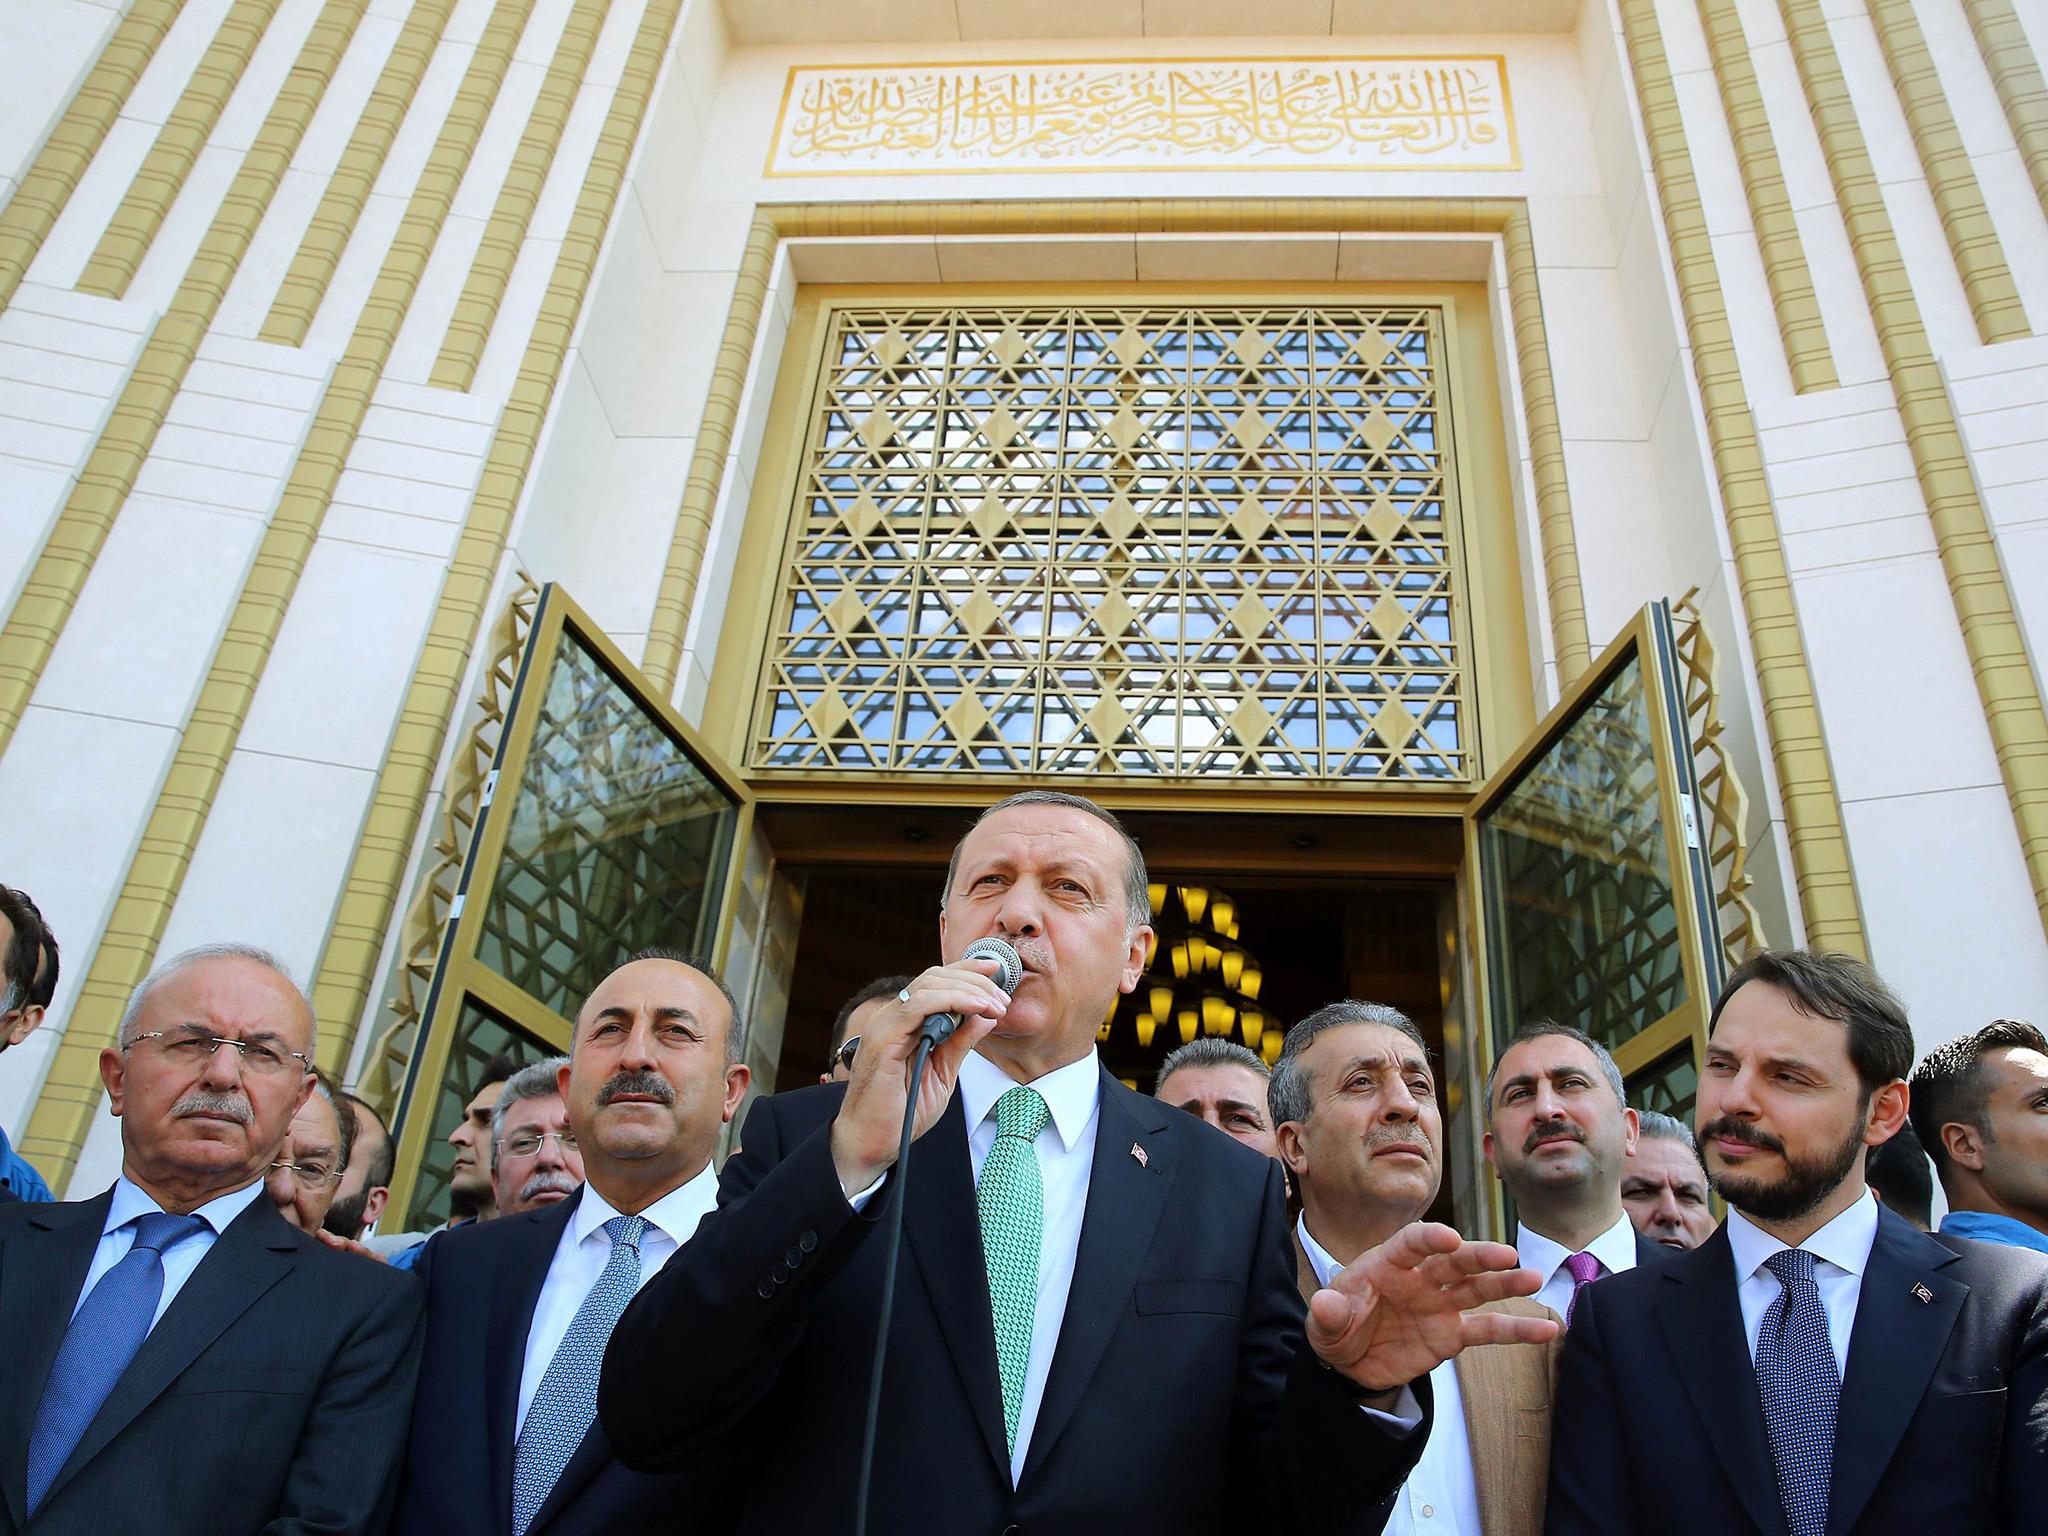 Recep Tayyip Erdogan delivering a speech after the Friday prayer at the Bestepe Millet Mosque in Ankara, on Friday